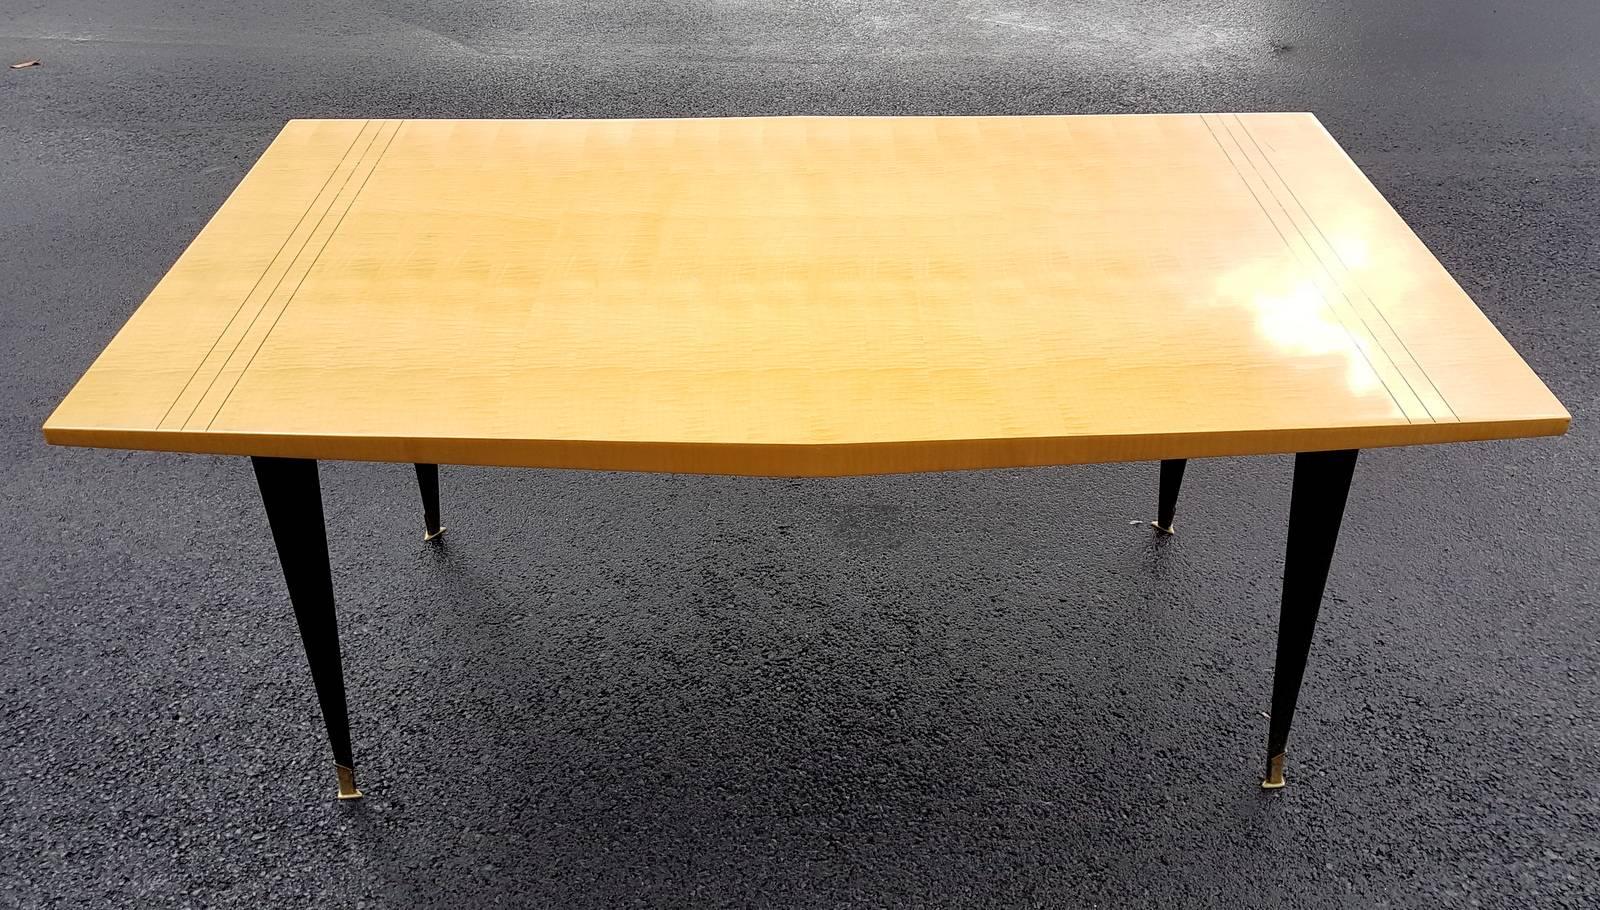 Superb design from the 1950s, blackened wood legs with sabots.
The table could be extended to 220 centimeters with leaves (original leaves missing).